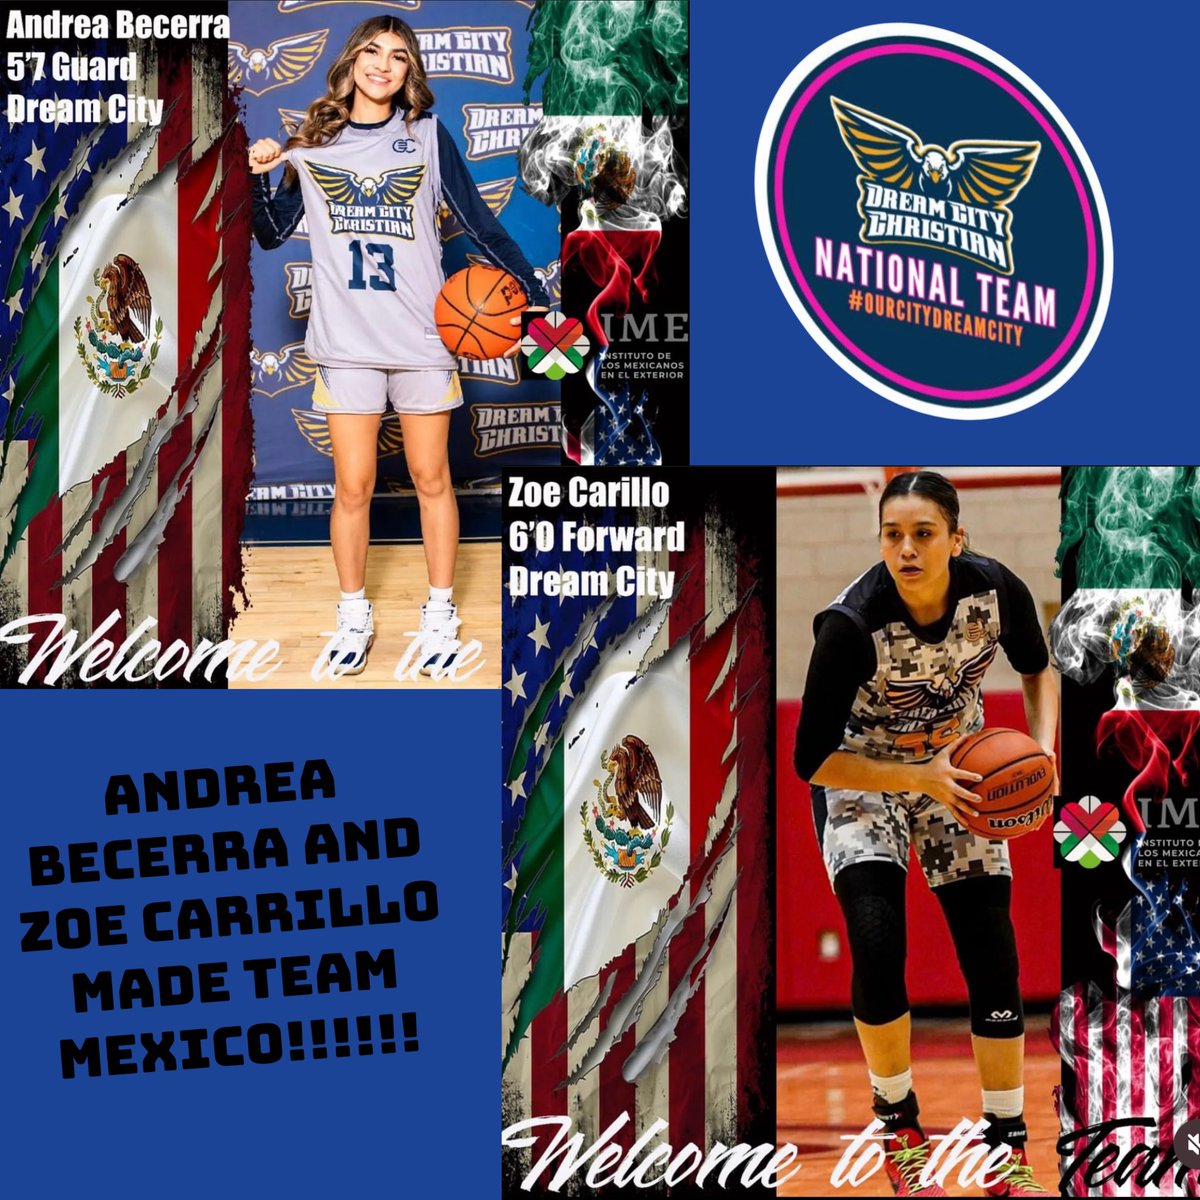 DCCGirlsHoops is proud to announce that @dreabecerra13 and @zoballin35 made the team and will be representing Team Mexico this summer! What an amazing opportunity for these two ladies! God continues to bless this program!